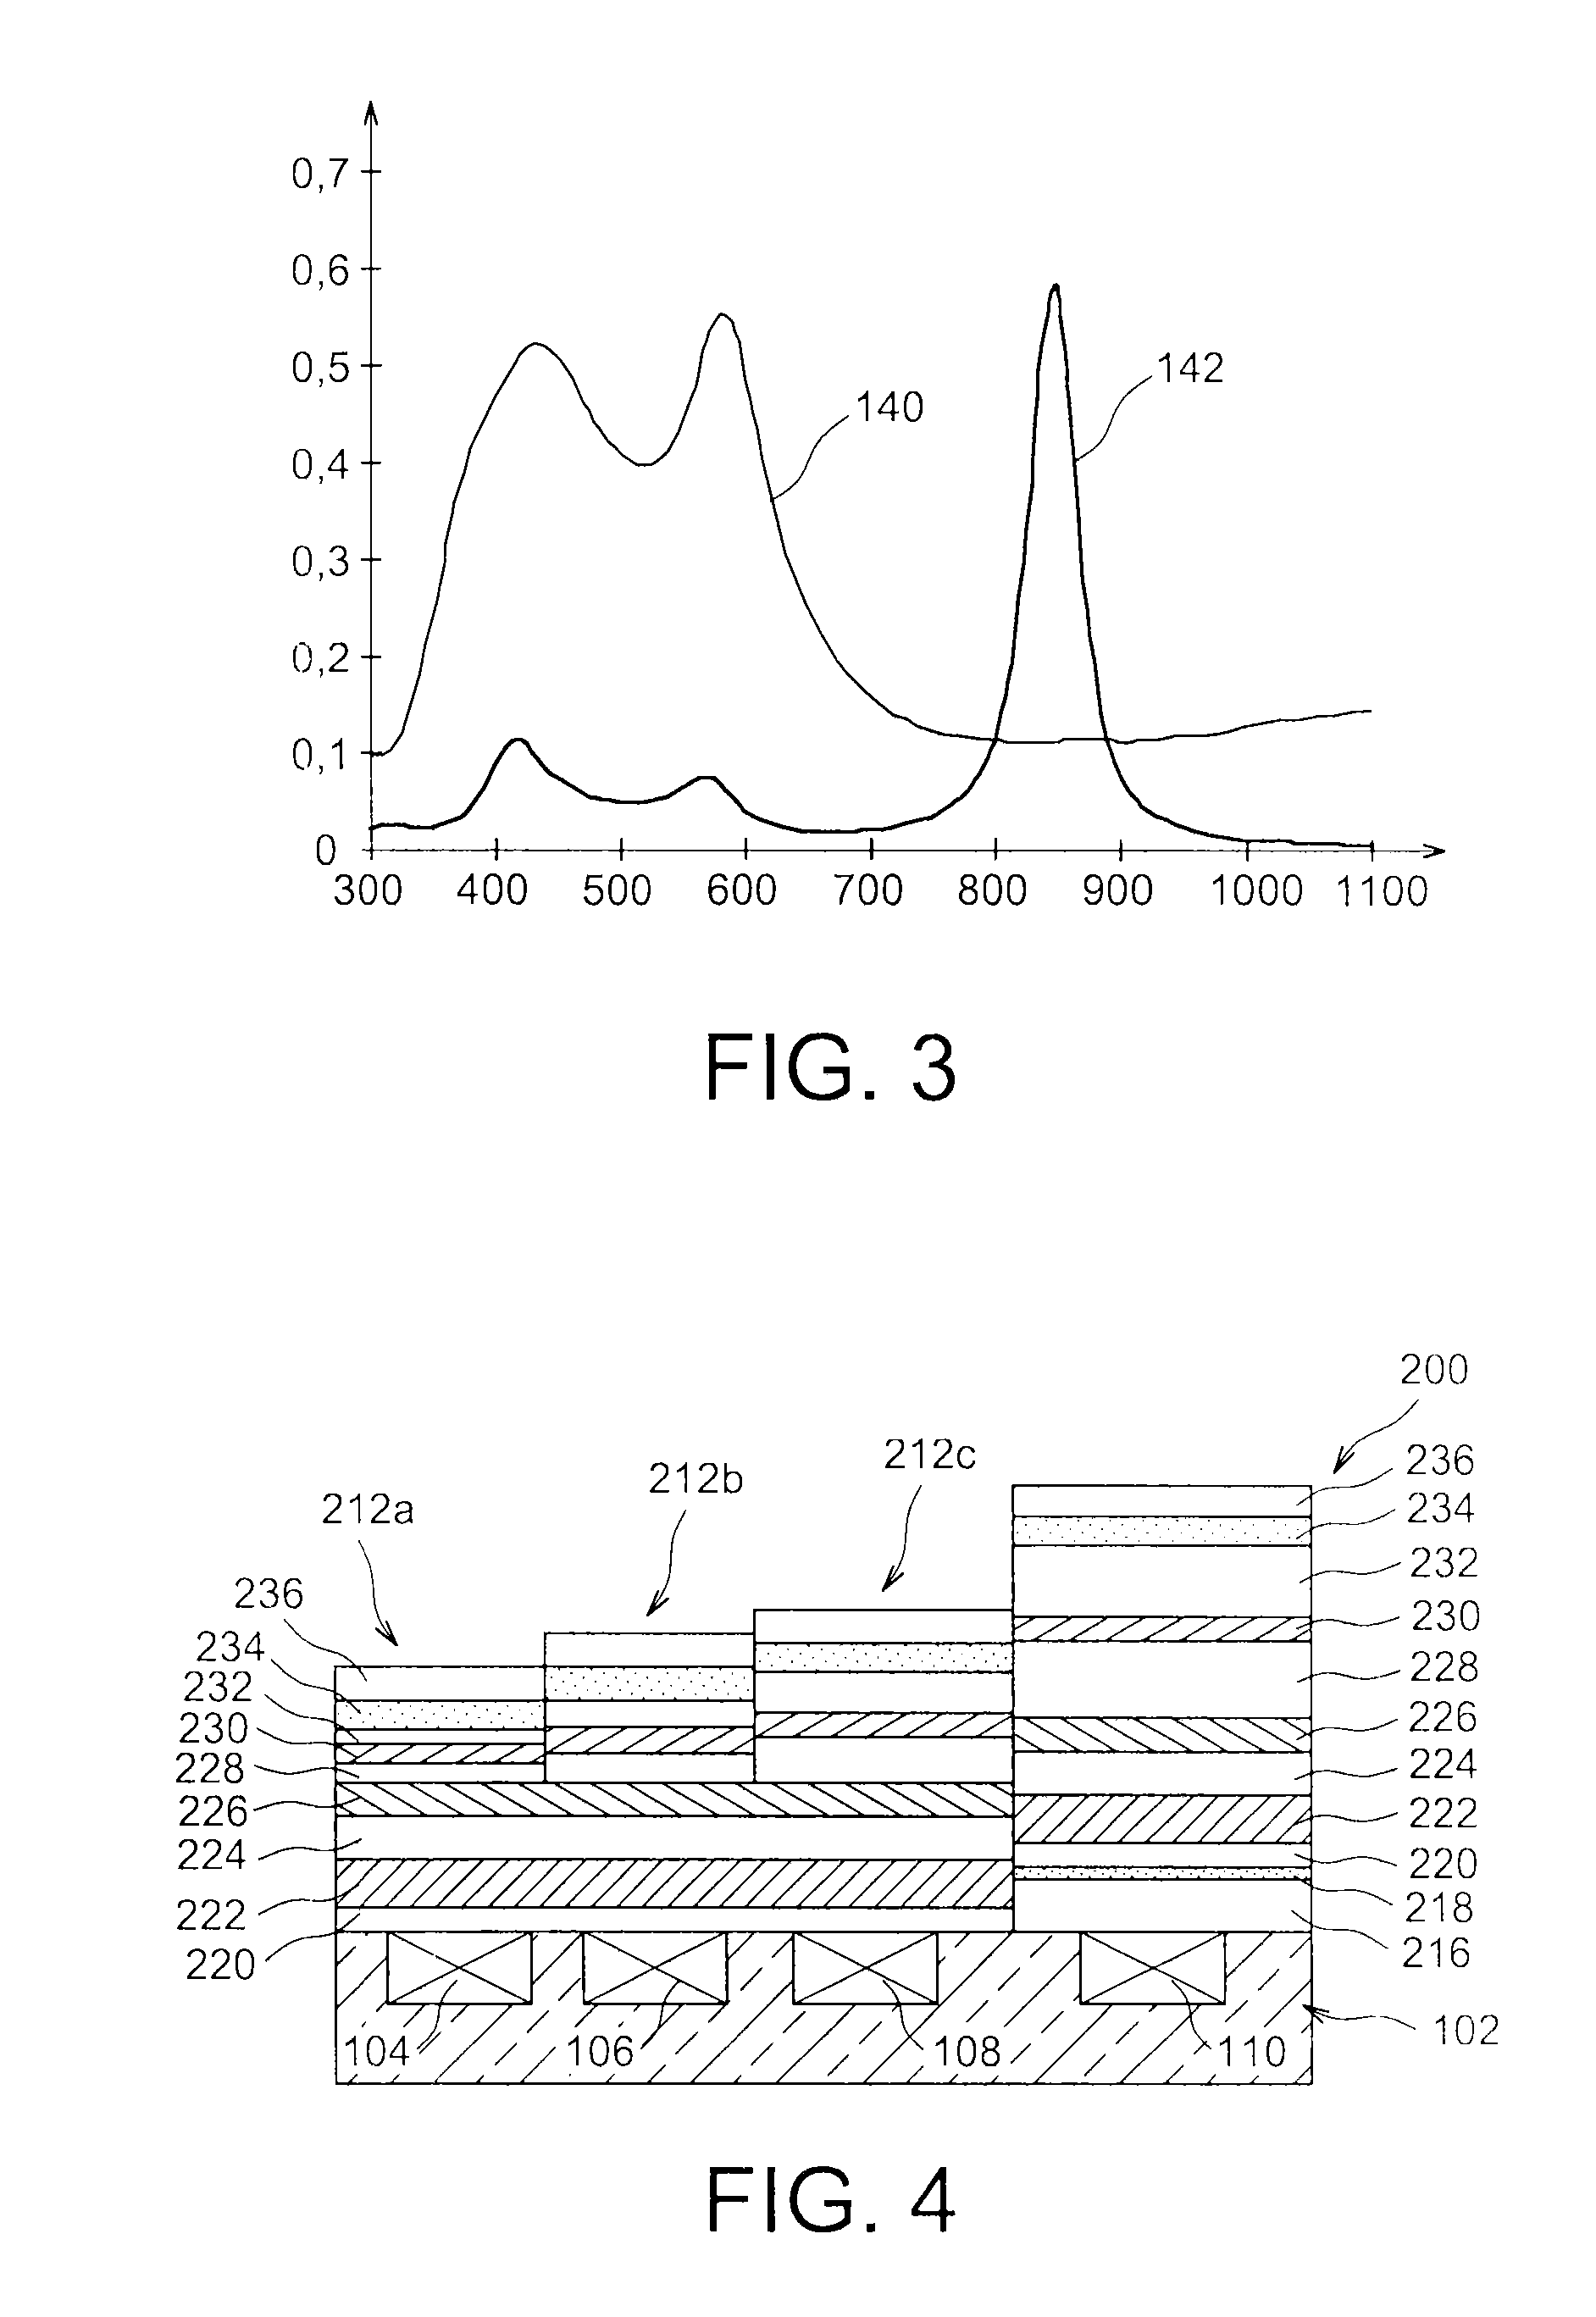 Optical filtering structure in the visible and/or infrared domain